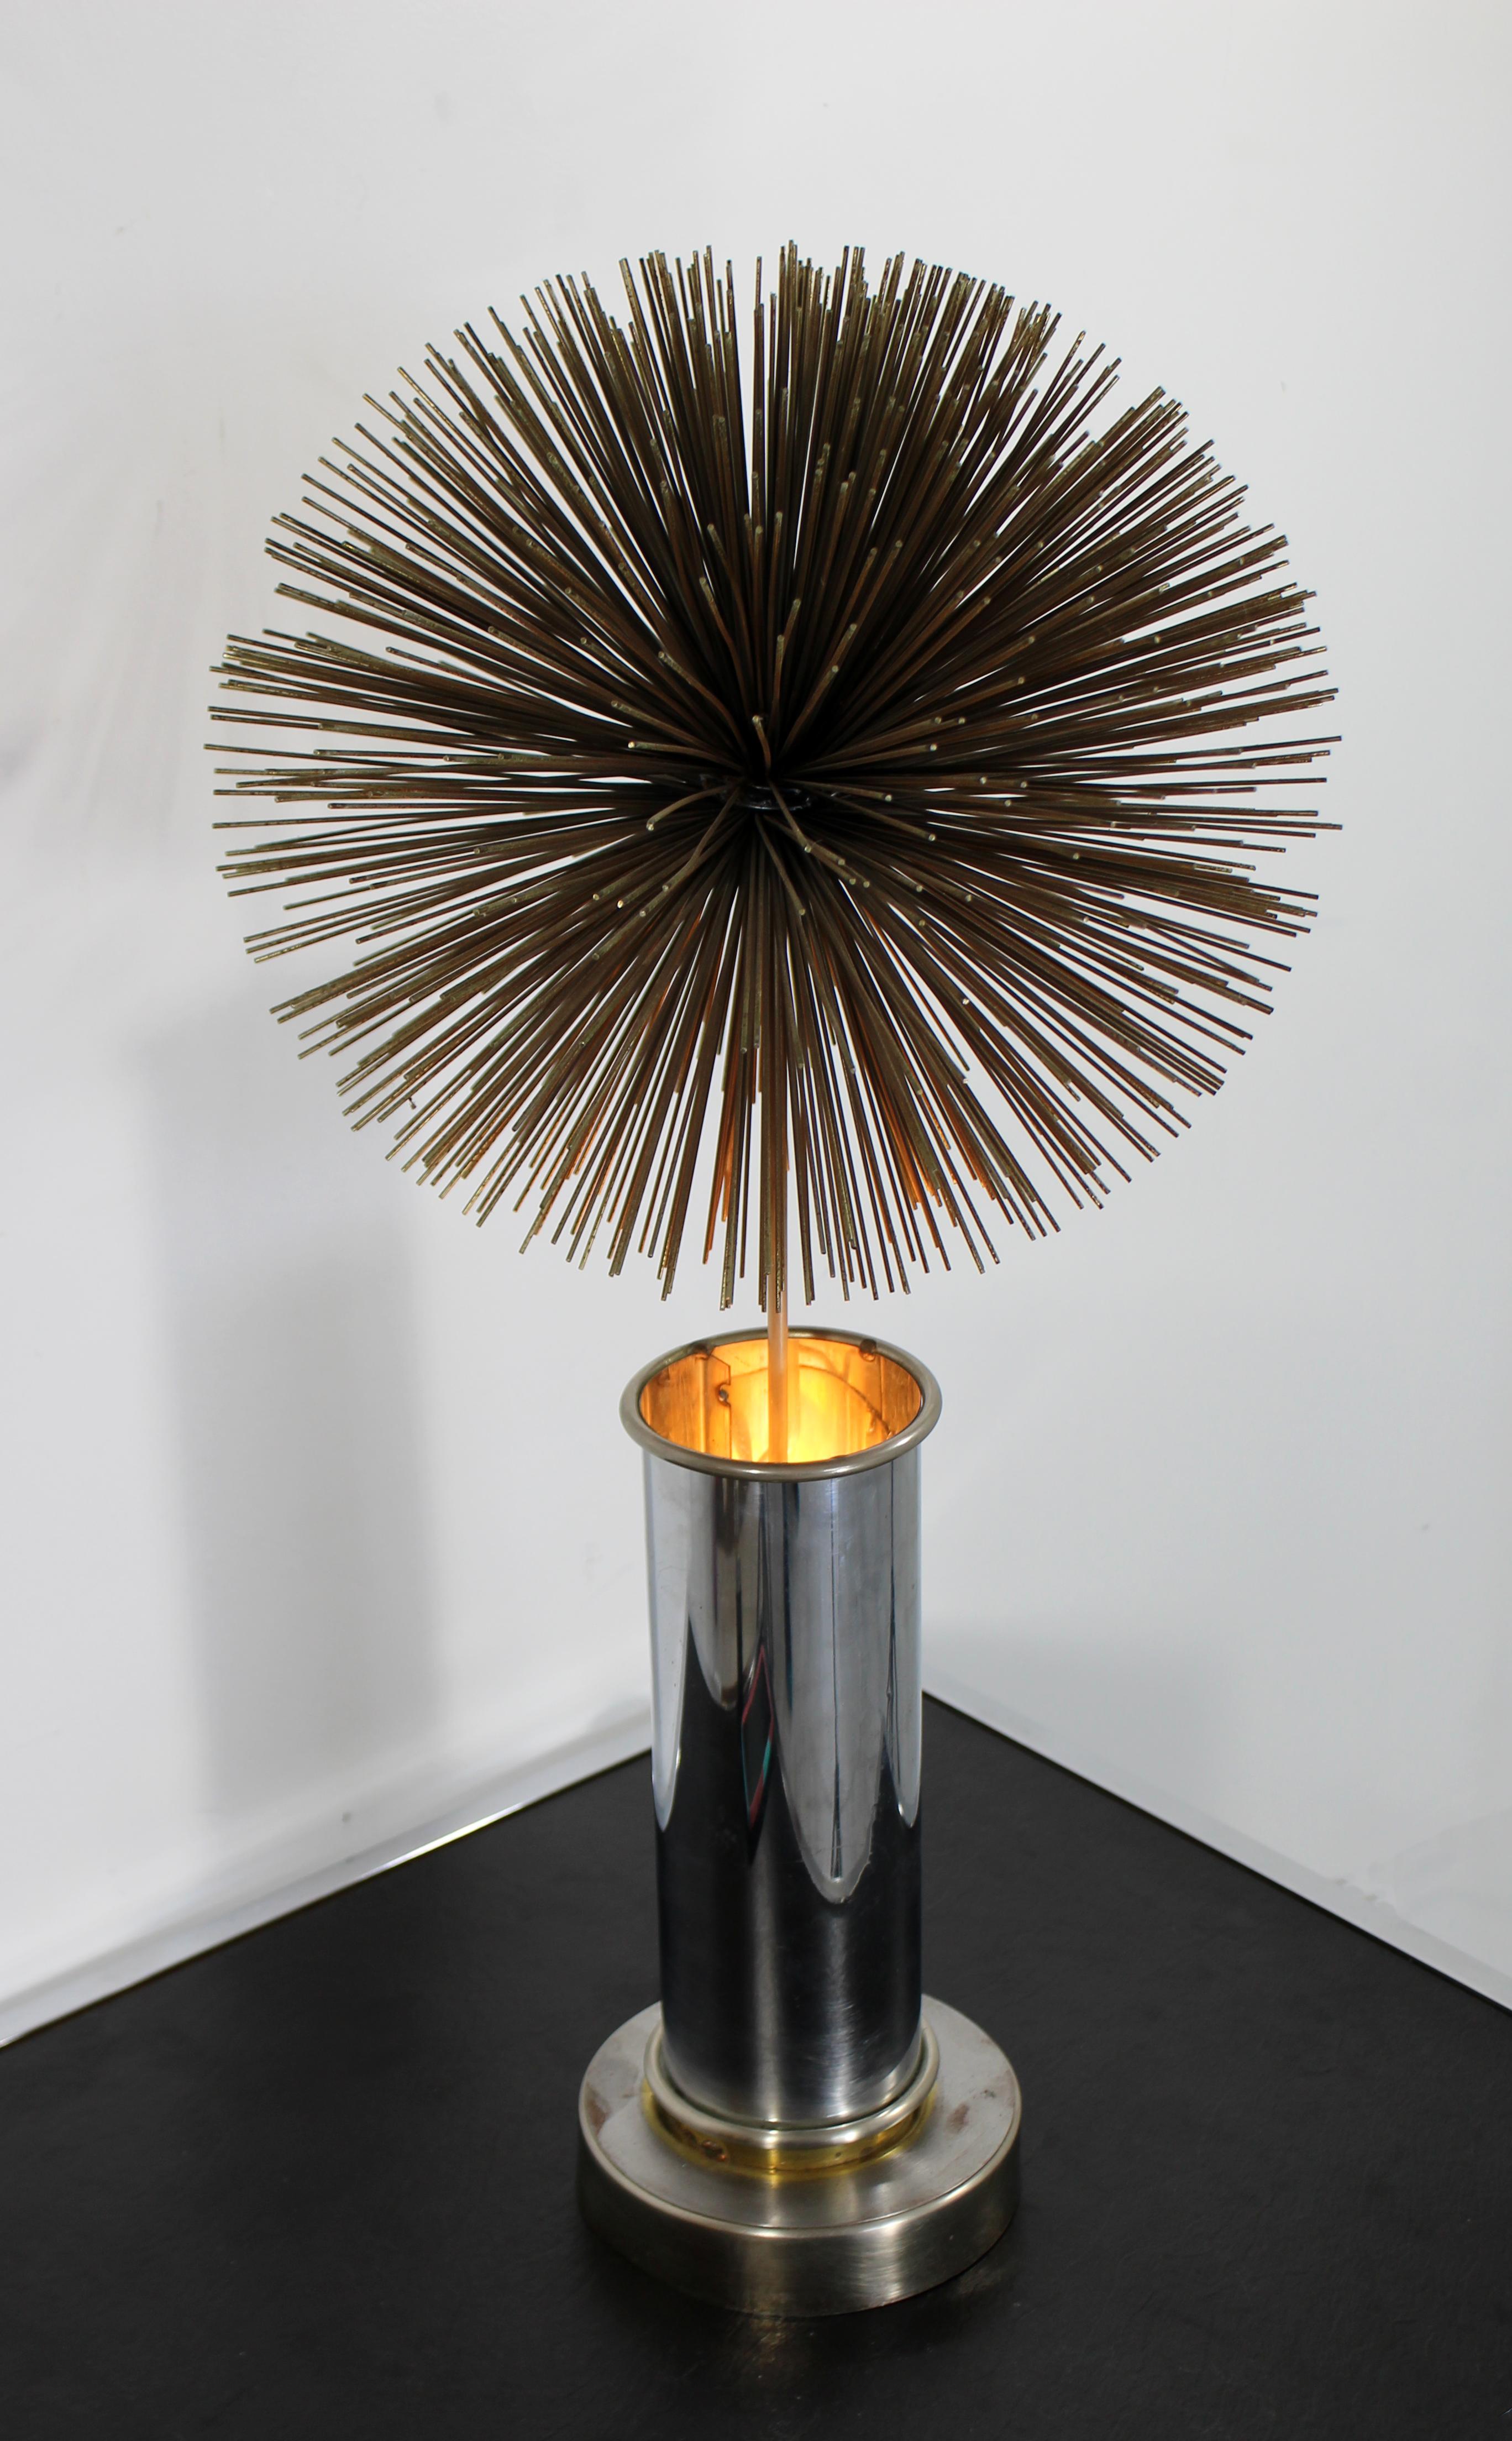 American Mid-Century Modern Curtis Jere Mixed Metals Spiky Pom Pom Table Lamp 1960s